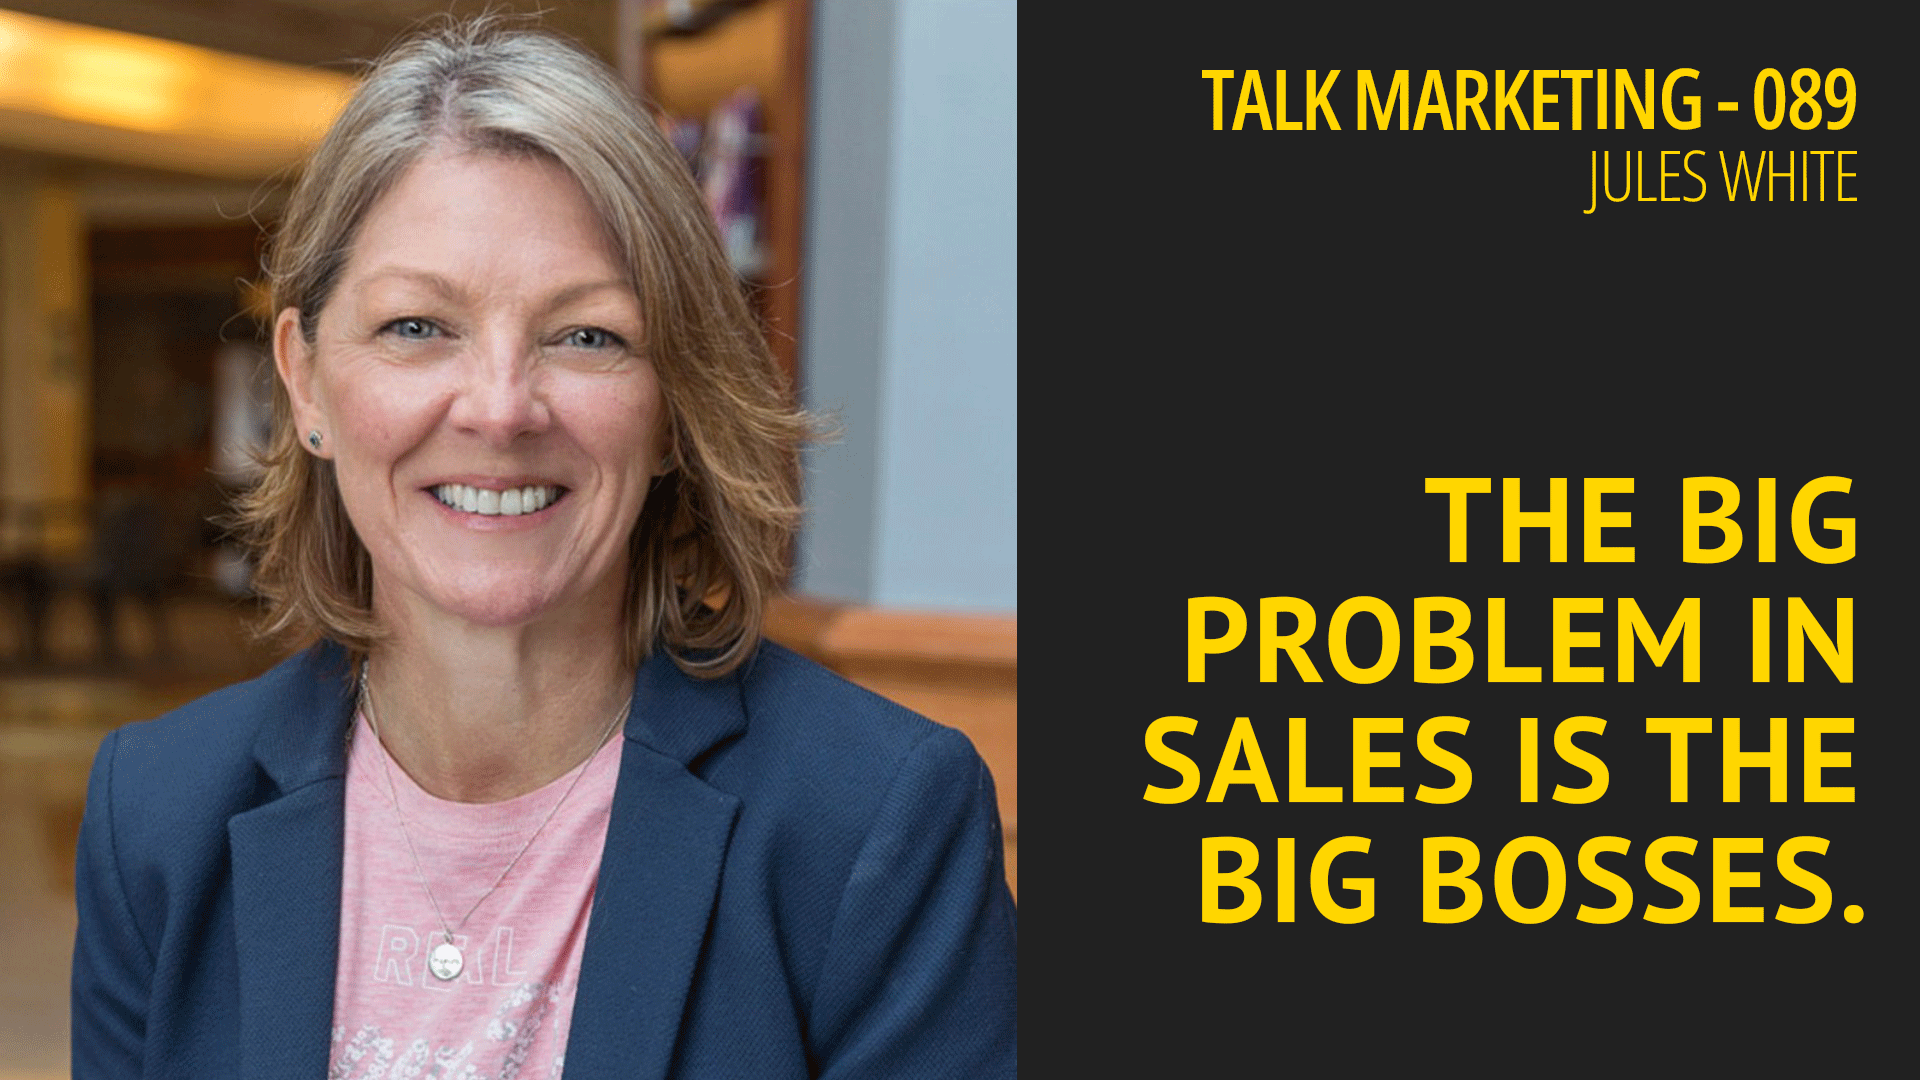 The big problem in sales is the big bosses – Talk Marketing 089 – Jules White